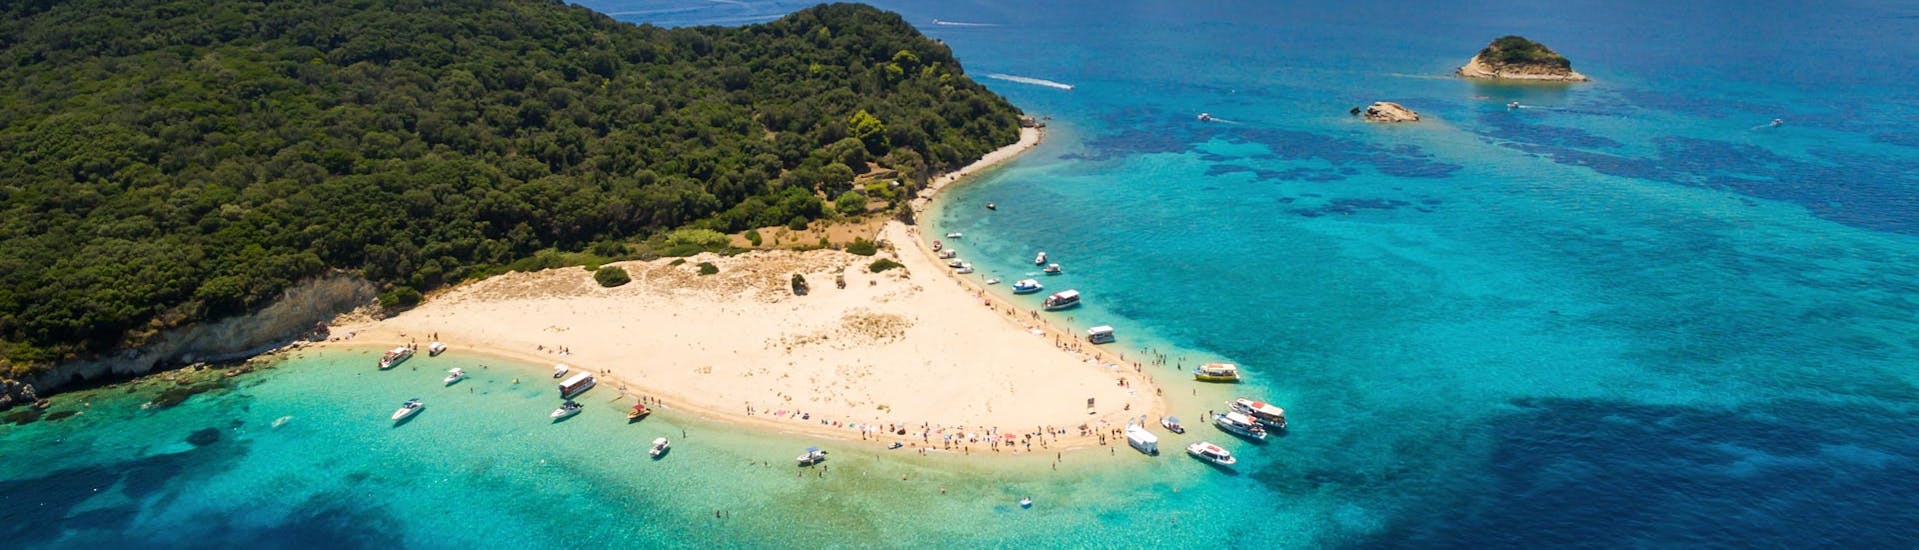 Turtle Island only by boat in Zakynthos, which can be visited by renting a boat in Keri (up to 10 people) with Fun@Sea.